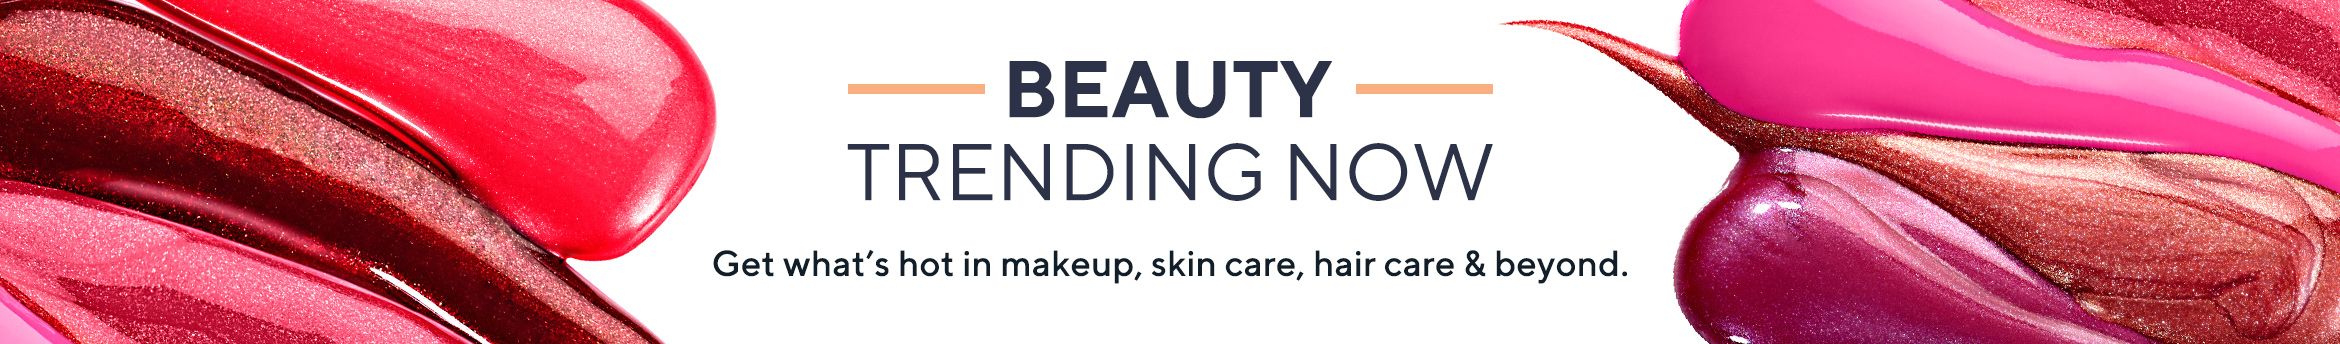 Beauty Trending Now.  Get what's hot in makeup, skin care, hair care & beyond.